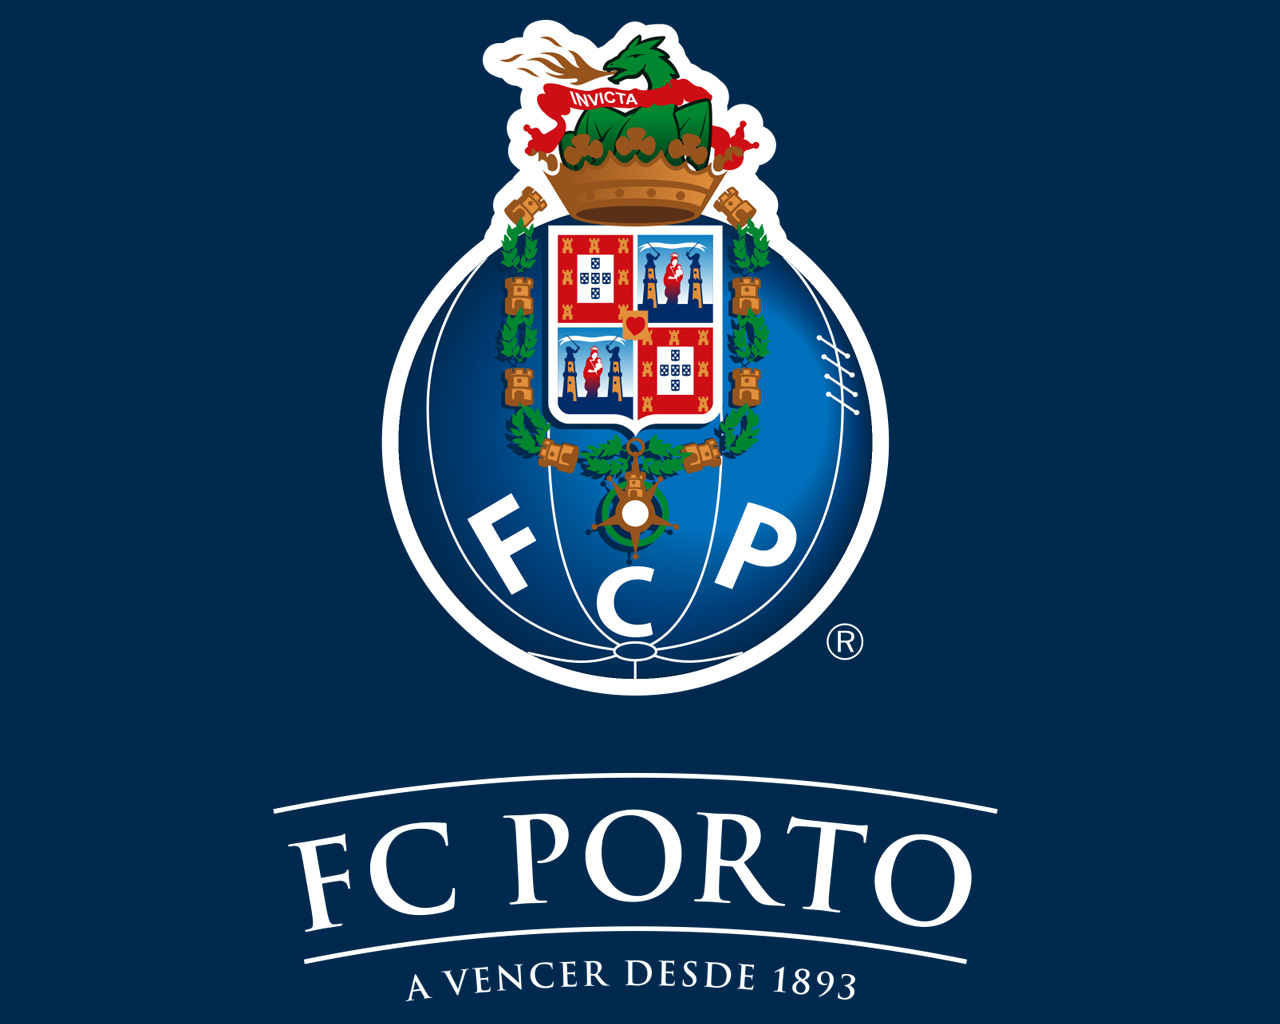 Primeira Liga giants FC Porto launches Campaign for Equality